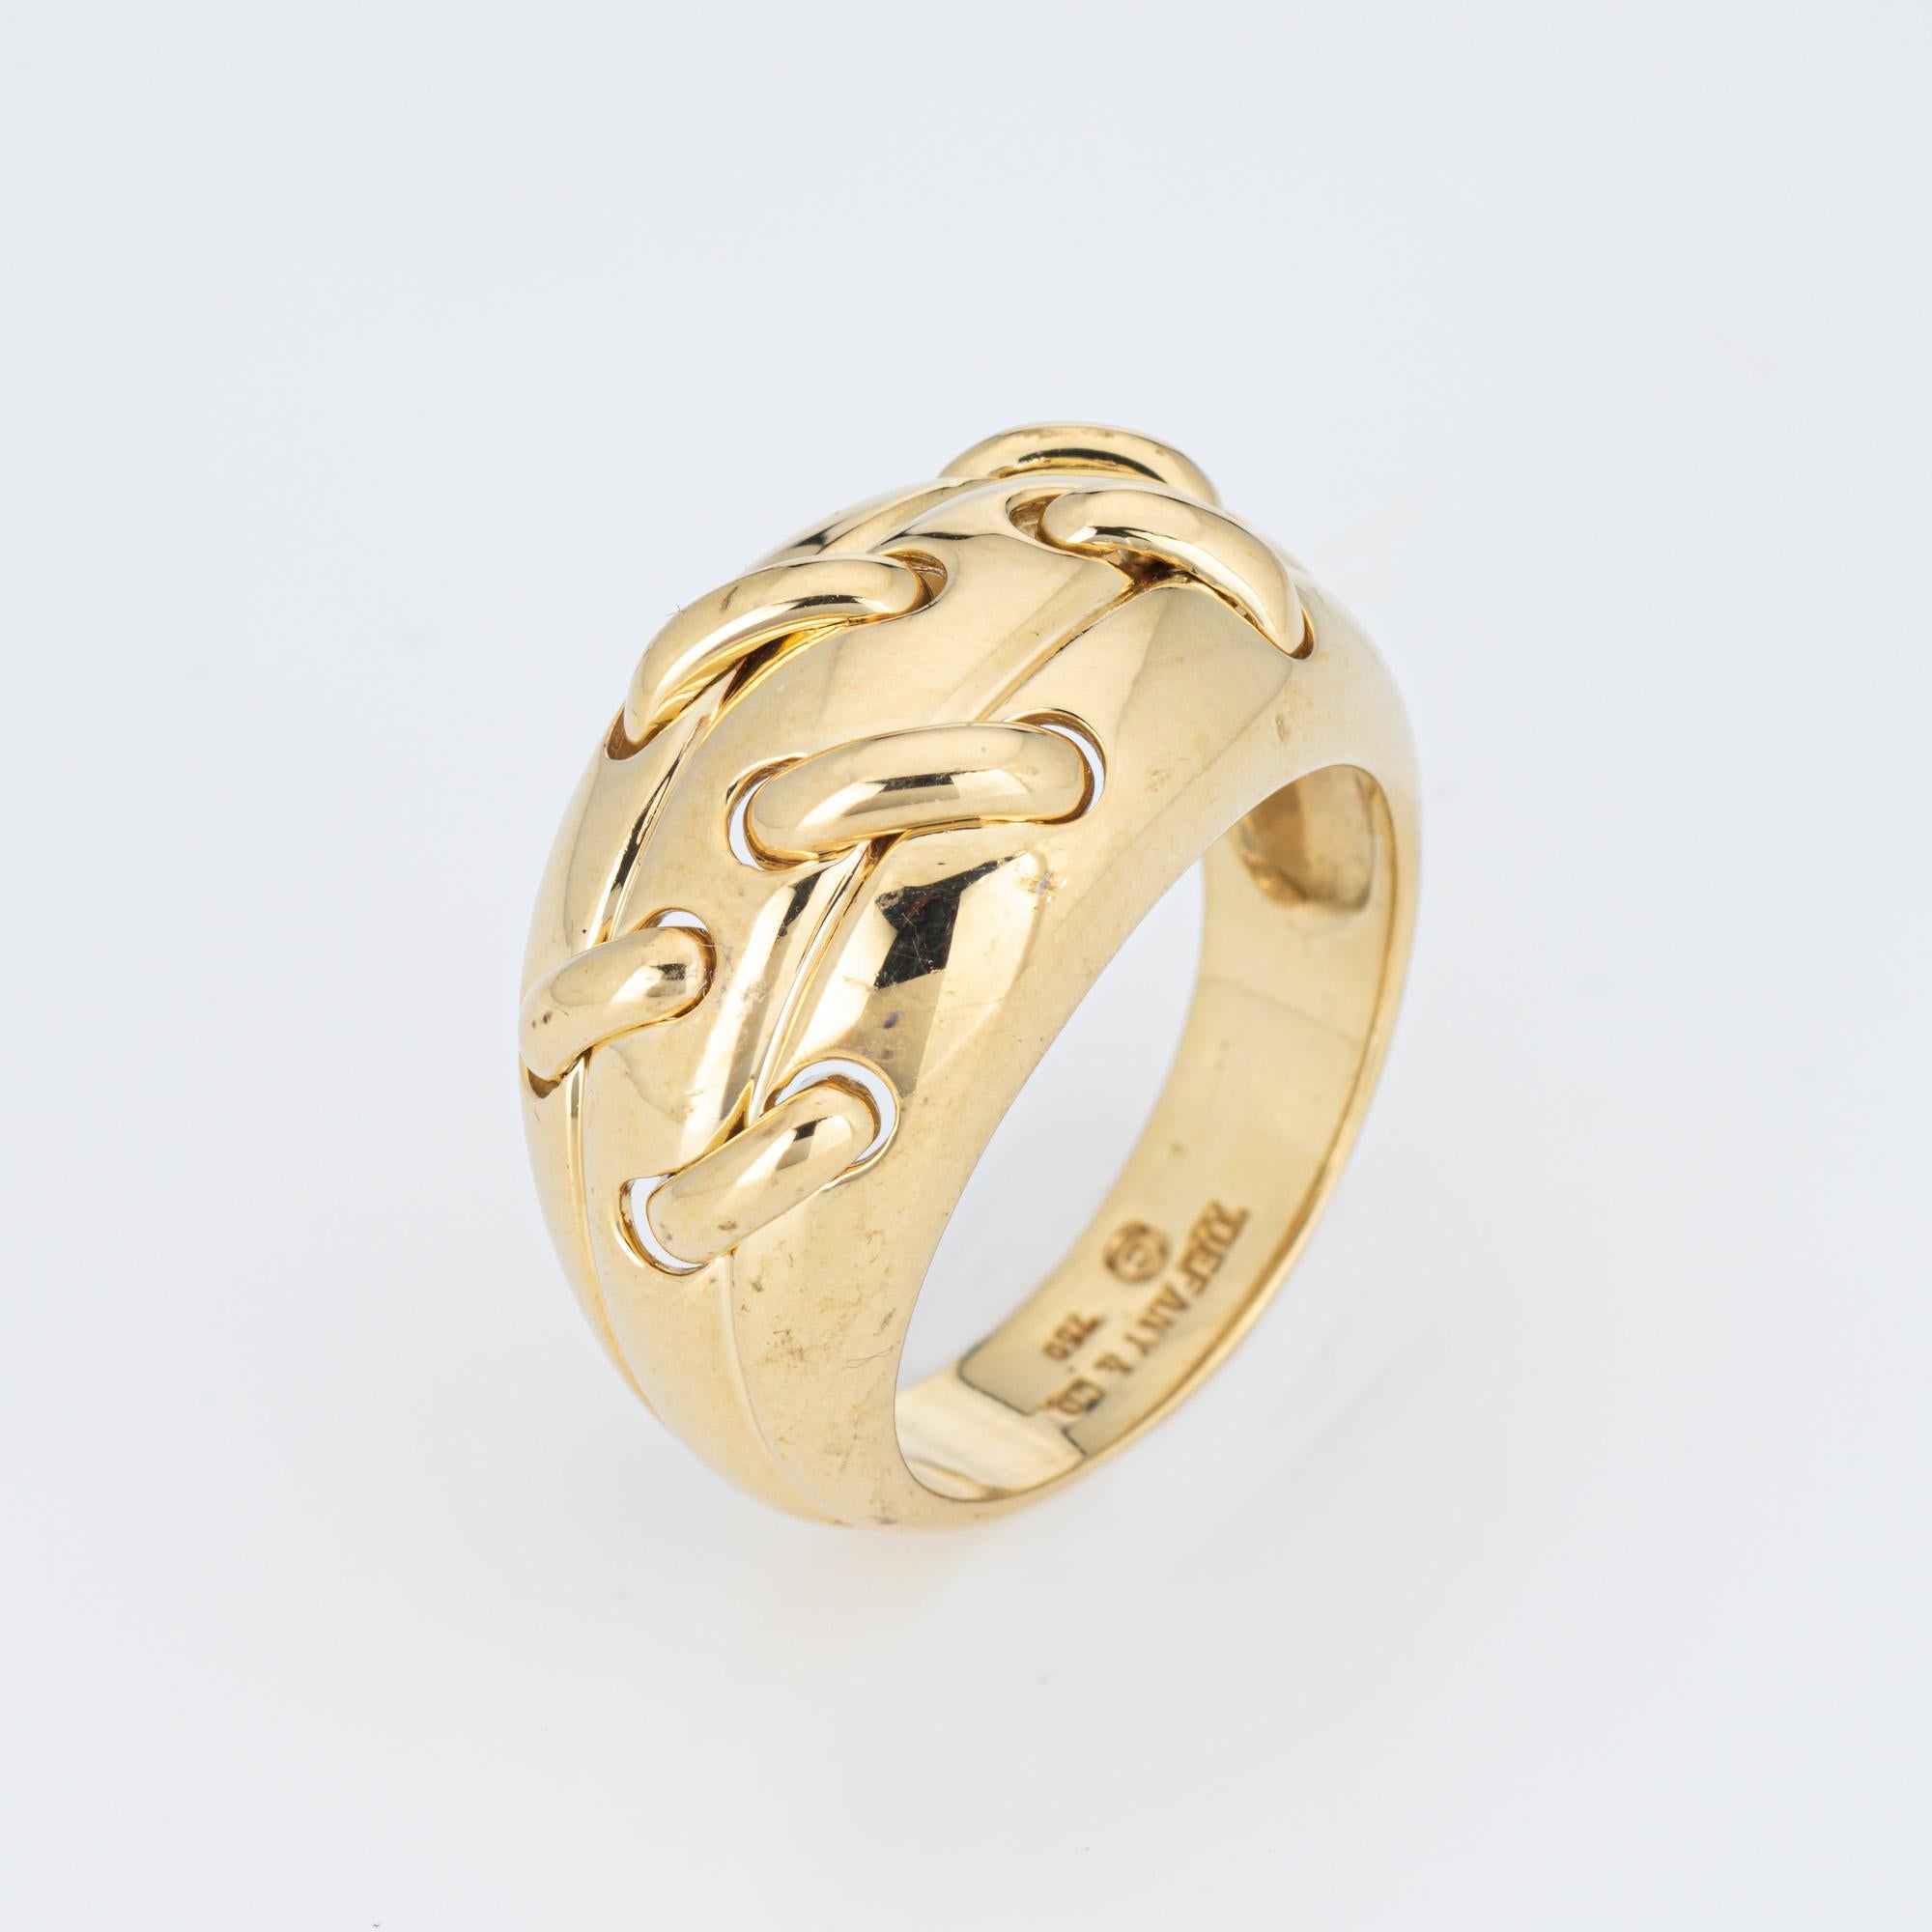 Vintage Tiffany & Co 'Stitch' ring crafted in 18 karat yellow gold (circa 1990s).  

The domed band features a thread like design that is 'stitched' in an off-center position. A striking and unique design that makes a statement. The low rise band